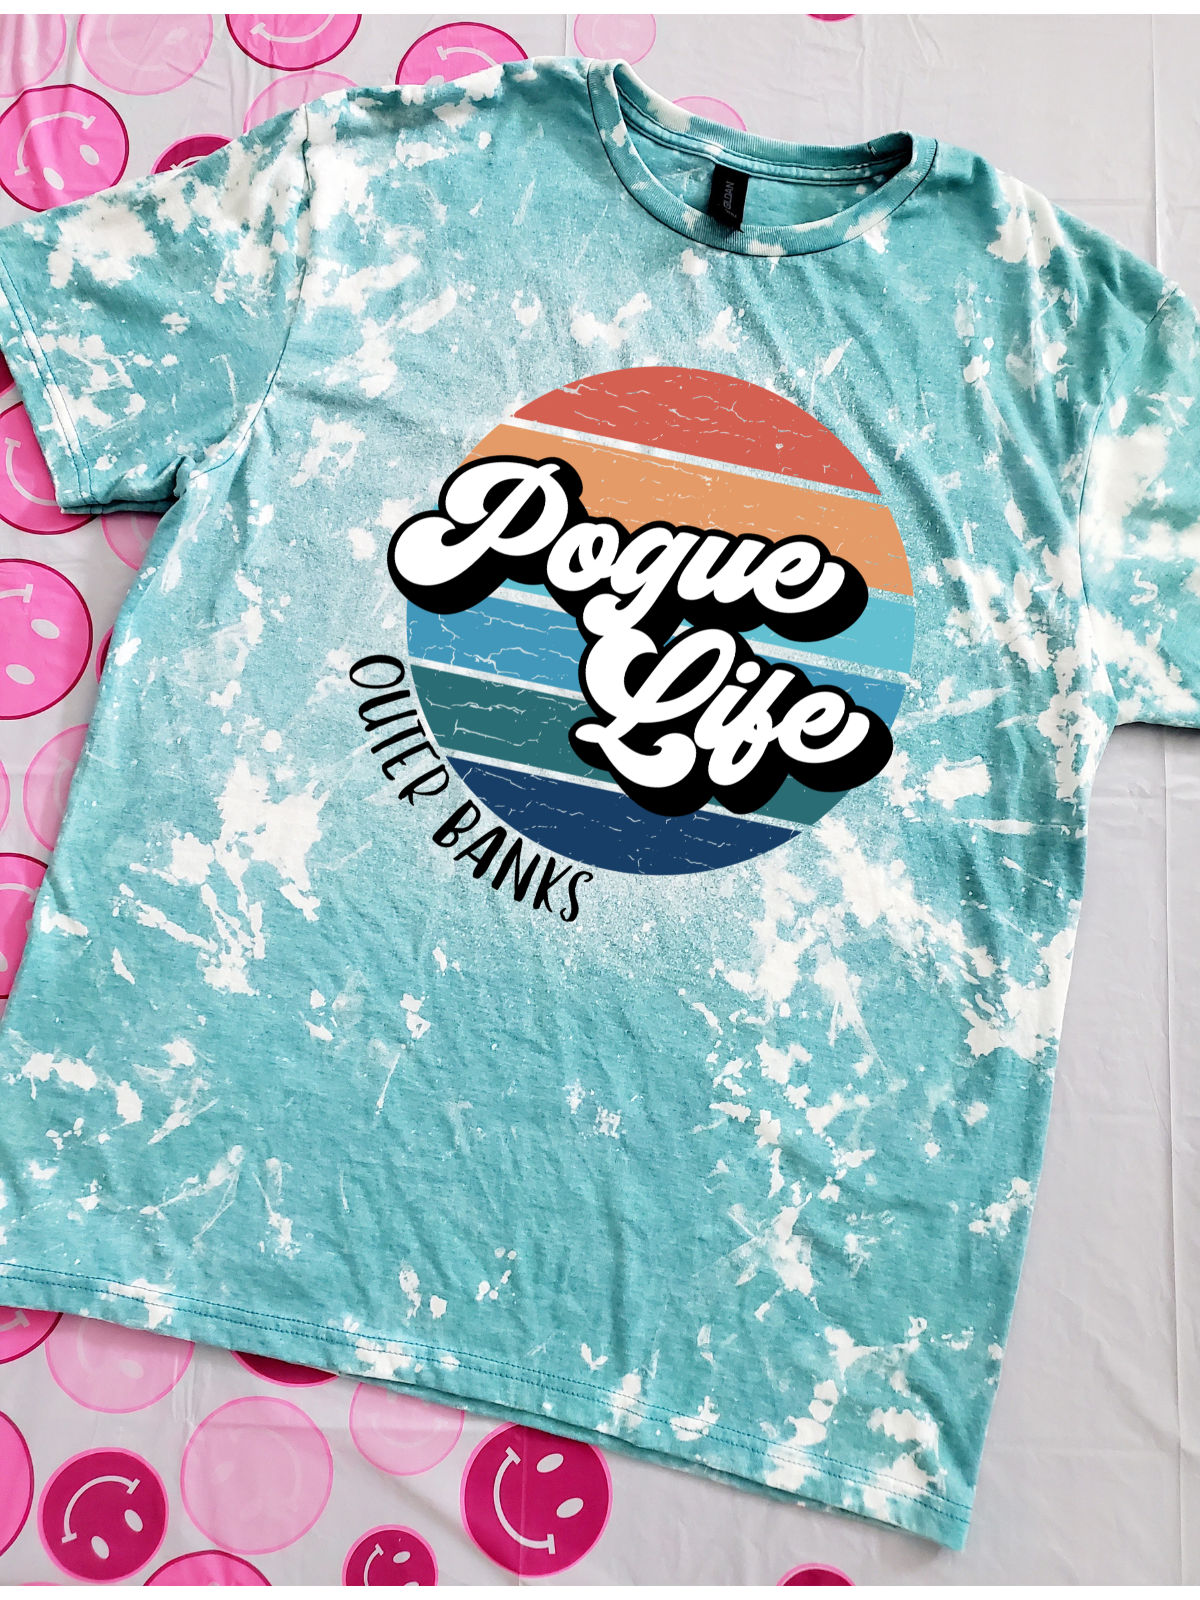 Pogue Life Outer Banks  Bleached tee